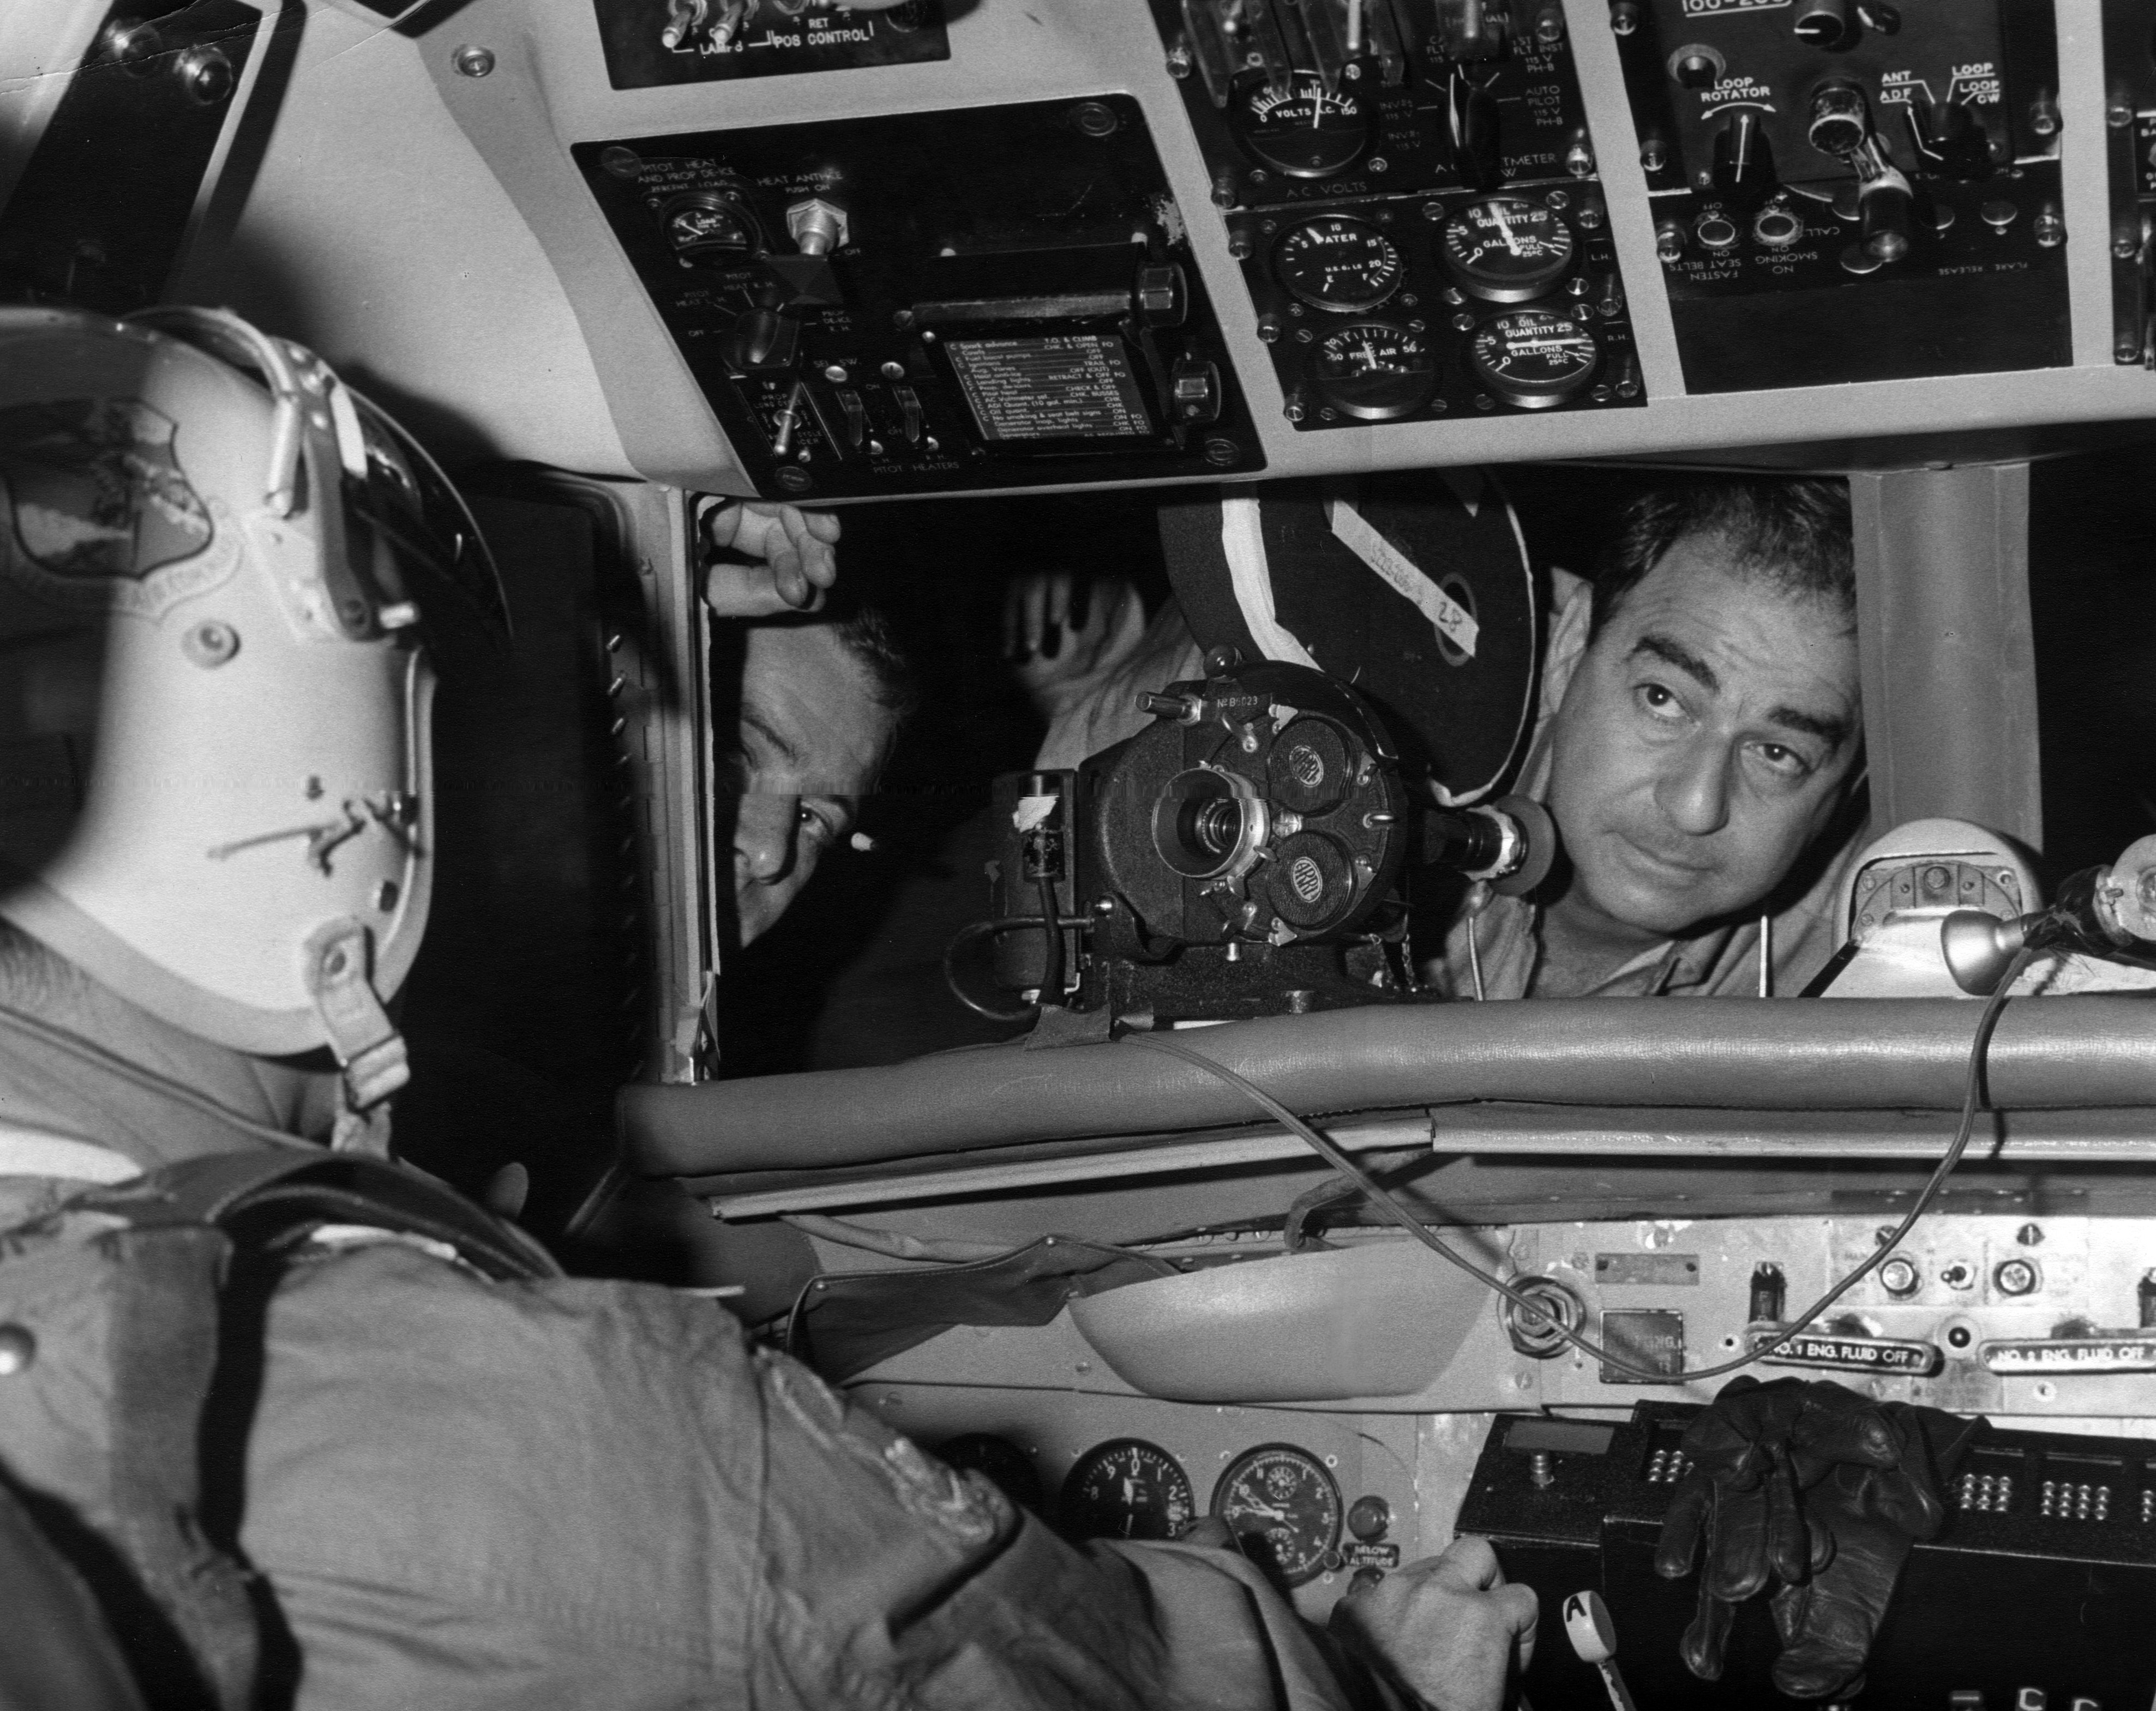 Hirschfeld angles into the cockpit of a B-52 bomber while filming the Cold War drama Fail Safe (1964).